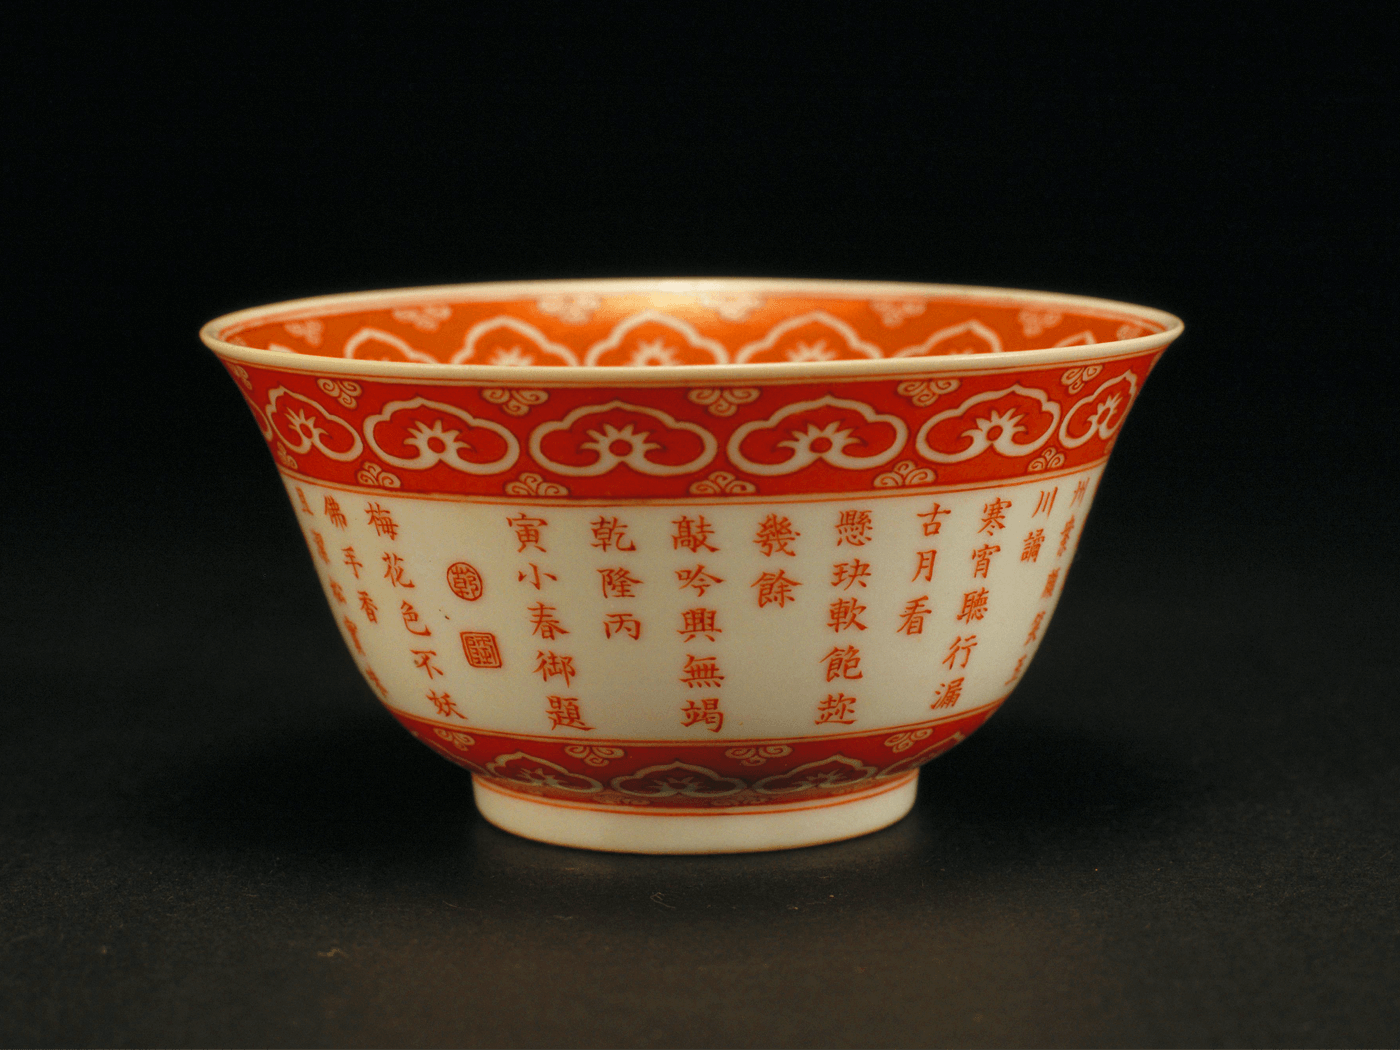 Tea bowl with poem by the Qianlong Emperor